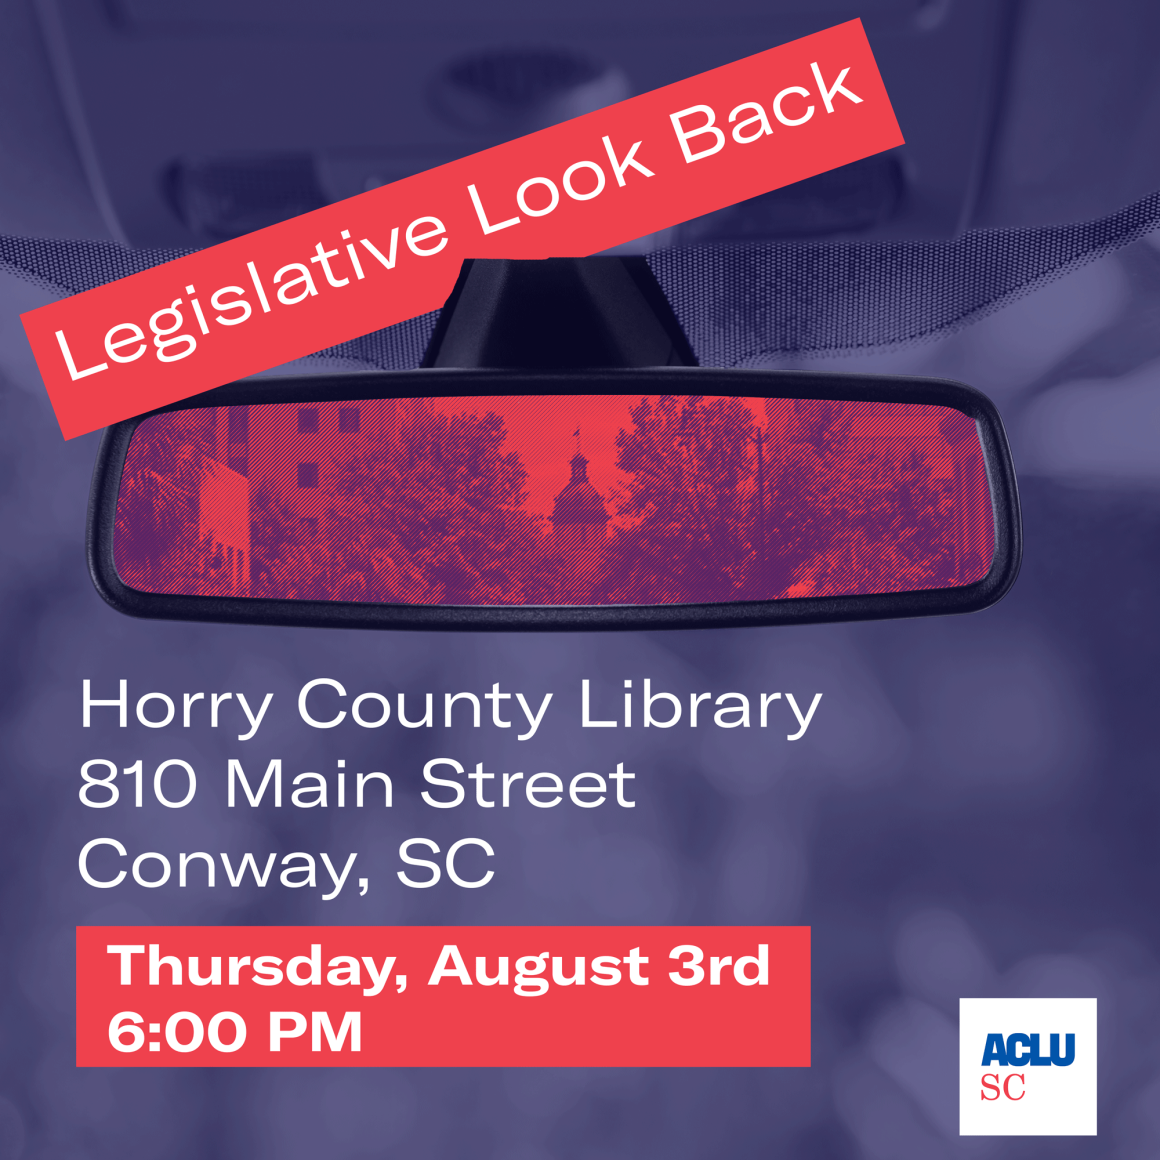 An infographic reads: "Legislative Look Back. Horry County Library, 810 Main Street, Conway, SC. Thursday, August 3rd, 6:00 PM." The red and blue graphic features a rearview car mirror with the Statehouse dome reflected. The ACLU-SC logo is at bottom righ